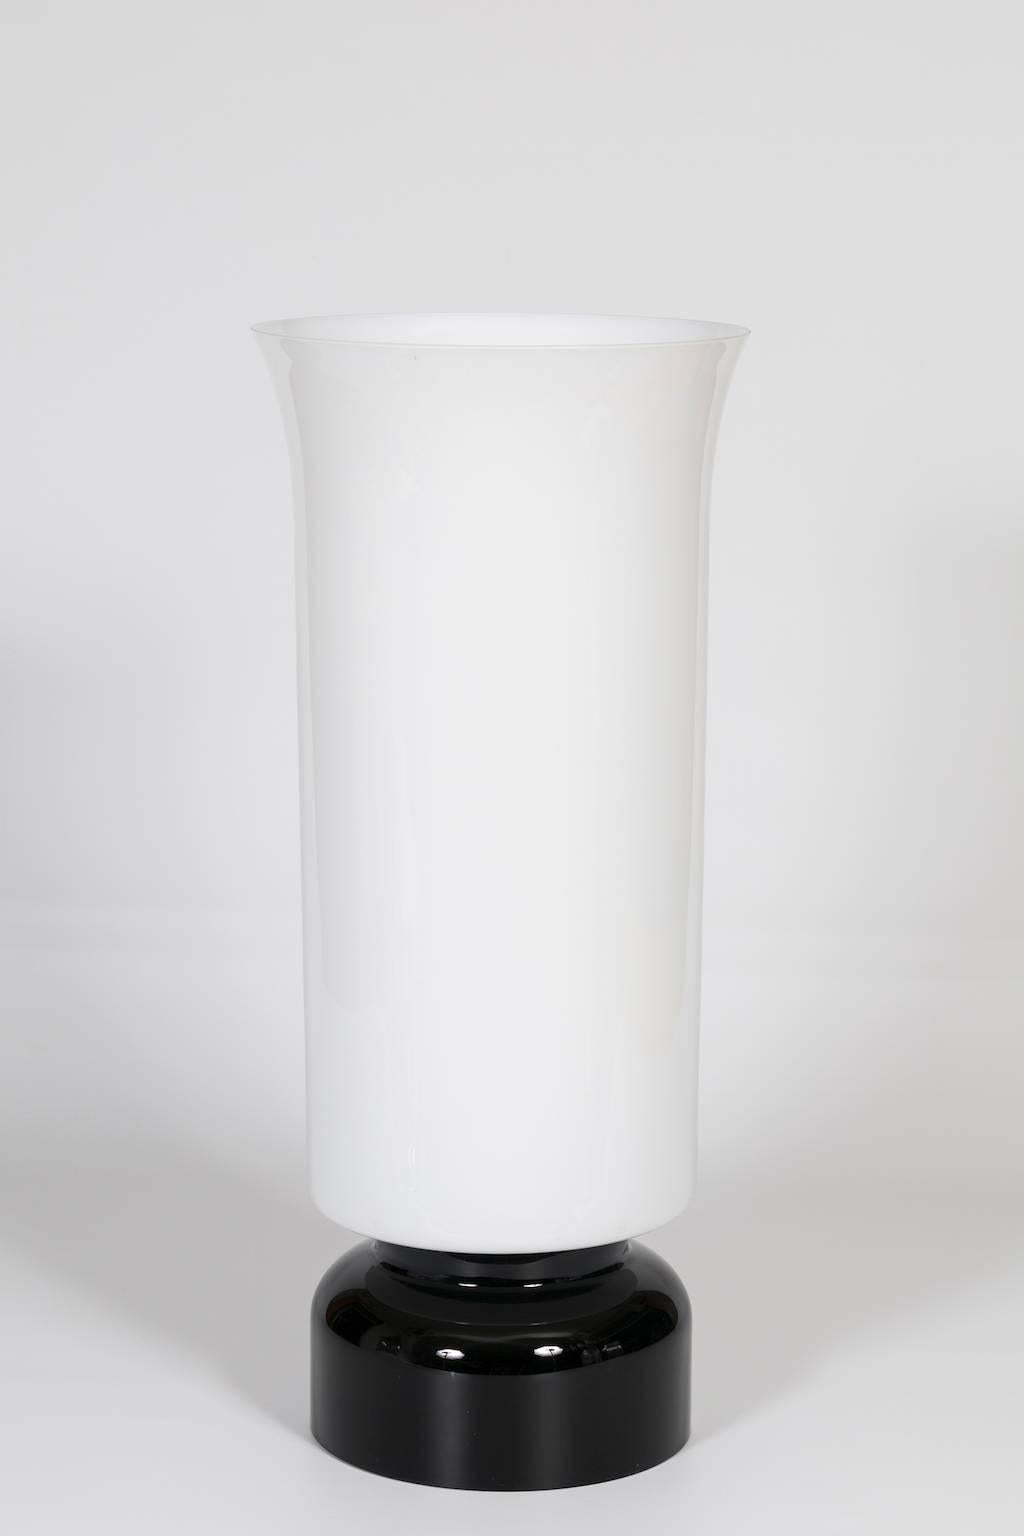 Elegant Italian Venetian, table lamp in blow Murano glass Modern in black and white 1980s.
This is a unique masterpiece entirely handcrafted in blown Murano Glass, in the Venetian Murano island. 
It is a massive and modern table lamp, composed by